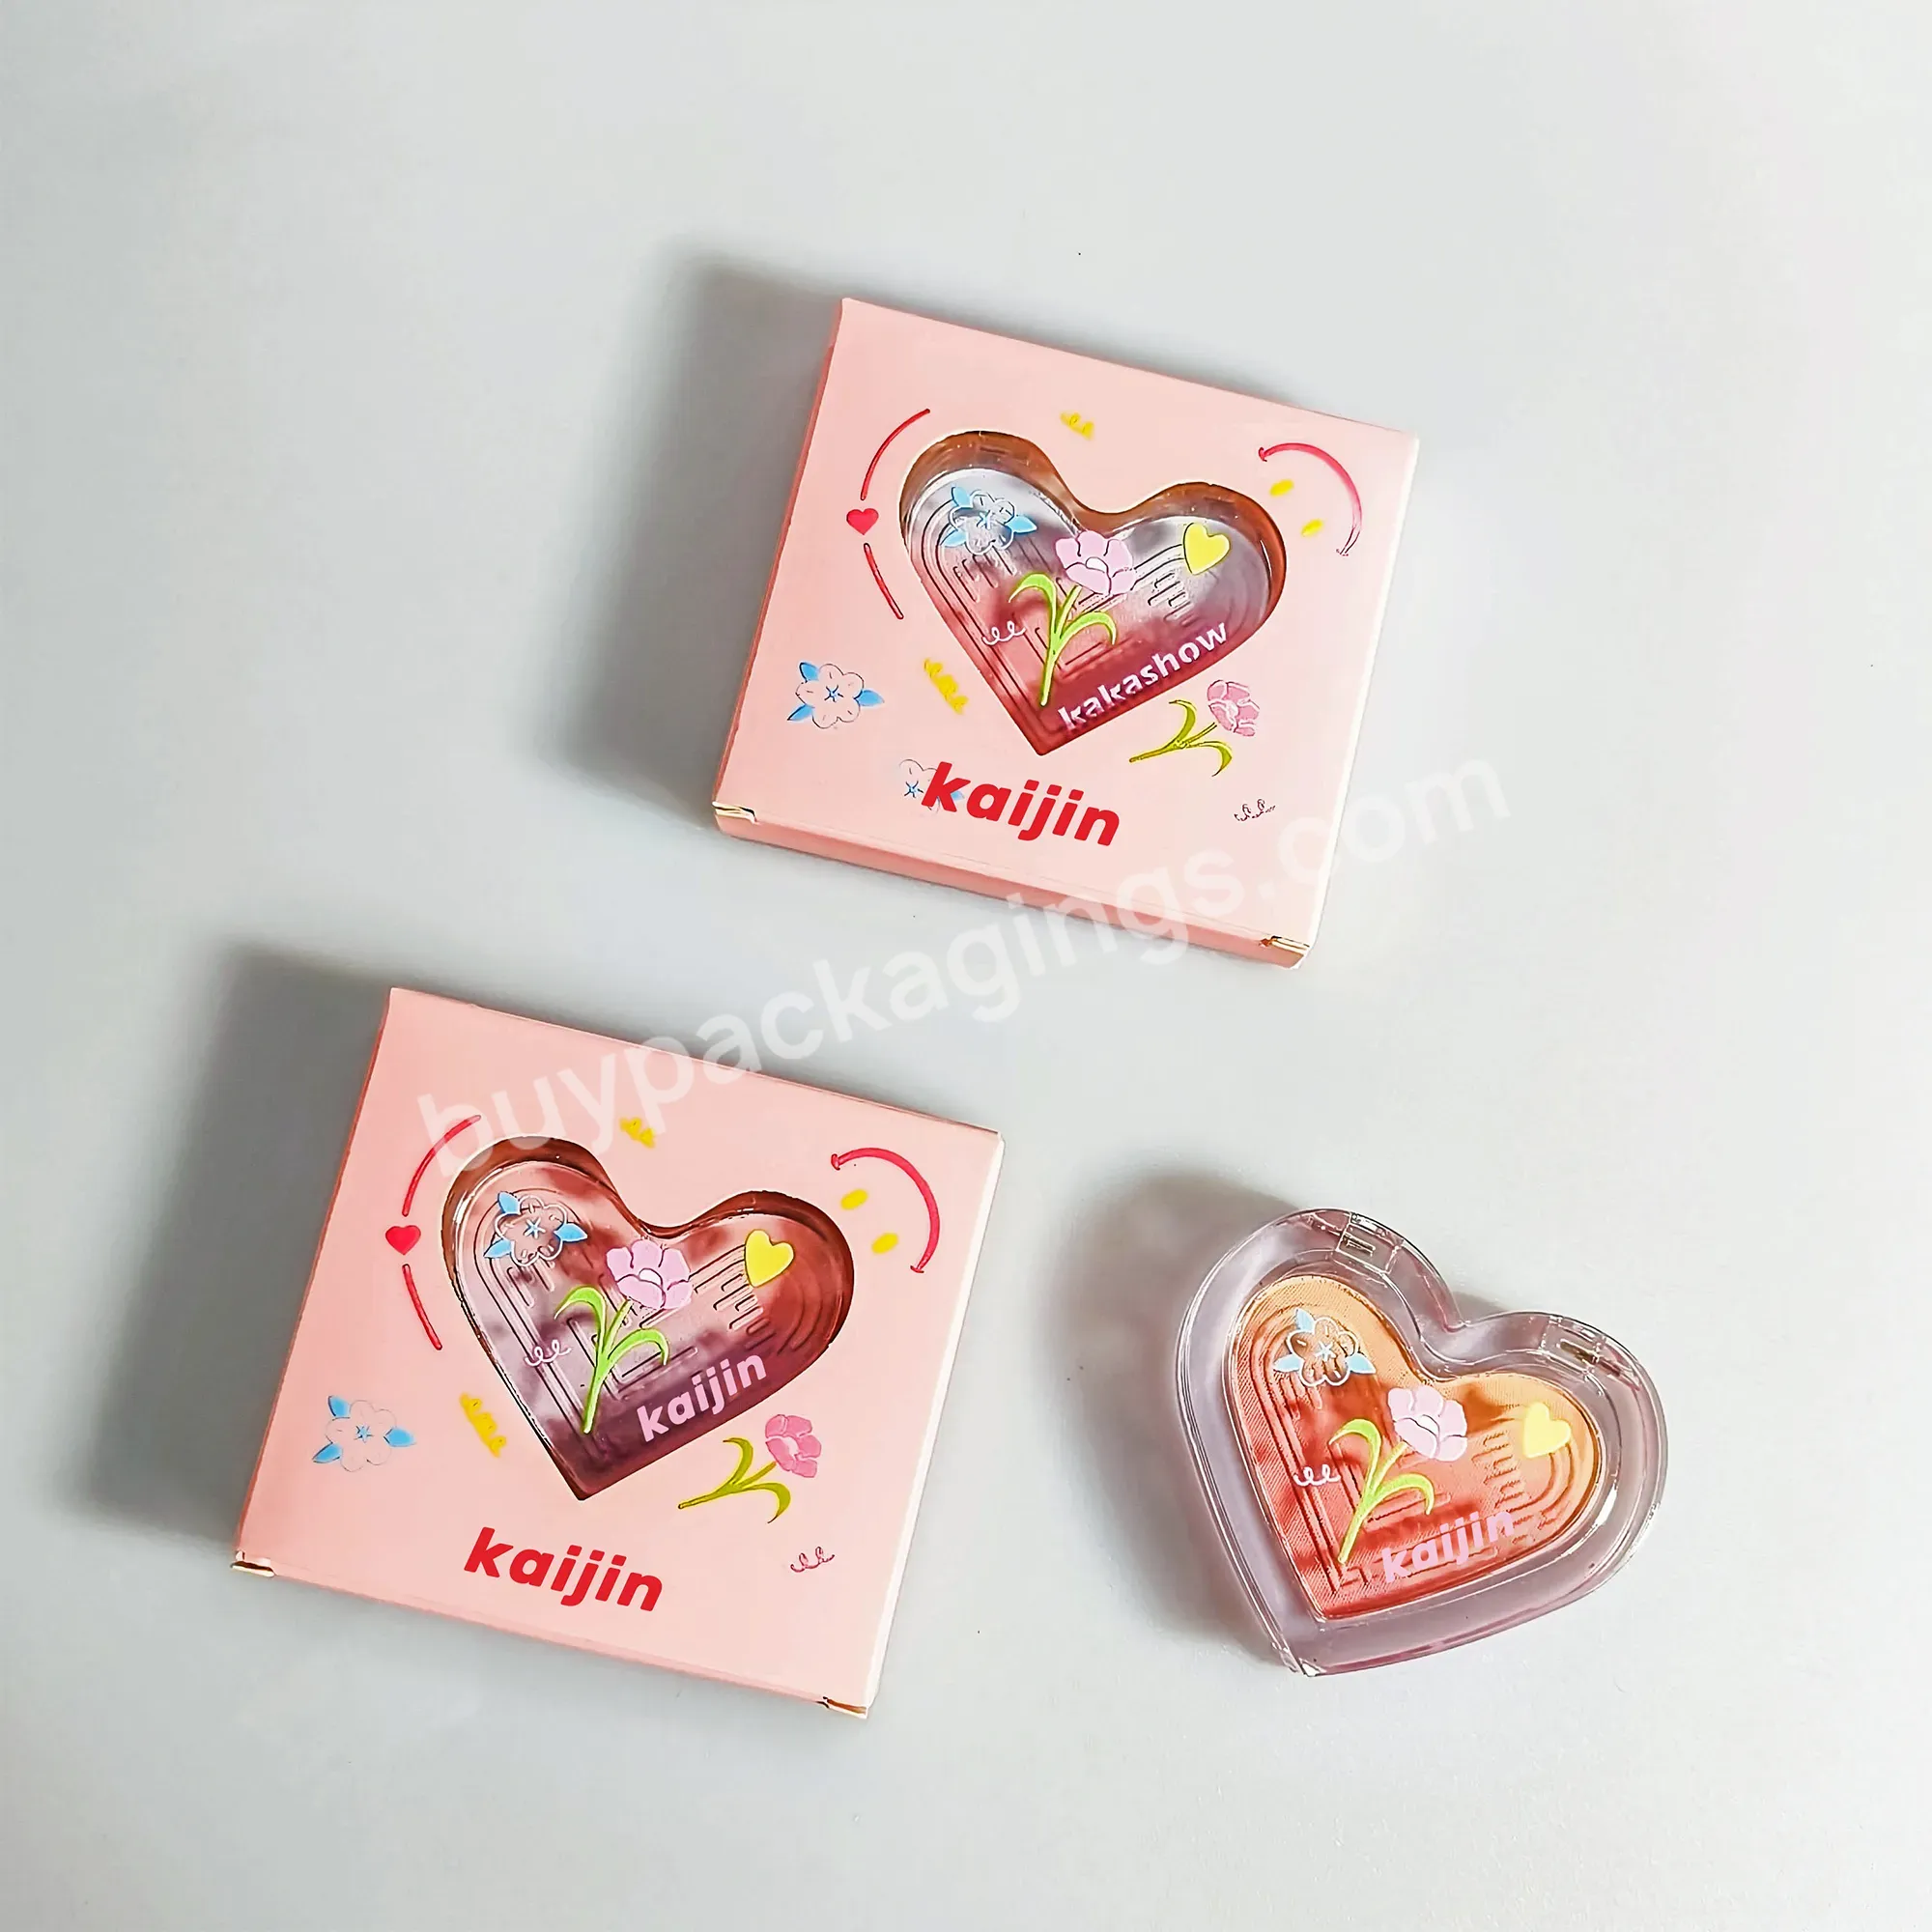 Heart Shaped Cosmetic Packaging Single Pan Making Powder Empty Compact Material Compact Powder Case Blush Compact Case - Buy As Plastic Blush Compact Case,Press Powder Compact Case Packaging,Heart Shaped Unique Single Pan Making Powder Empty Compact